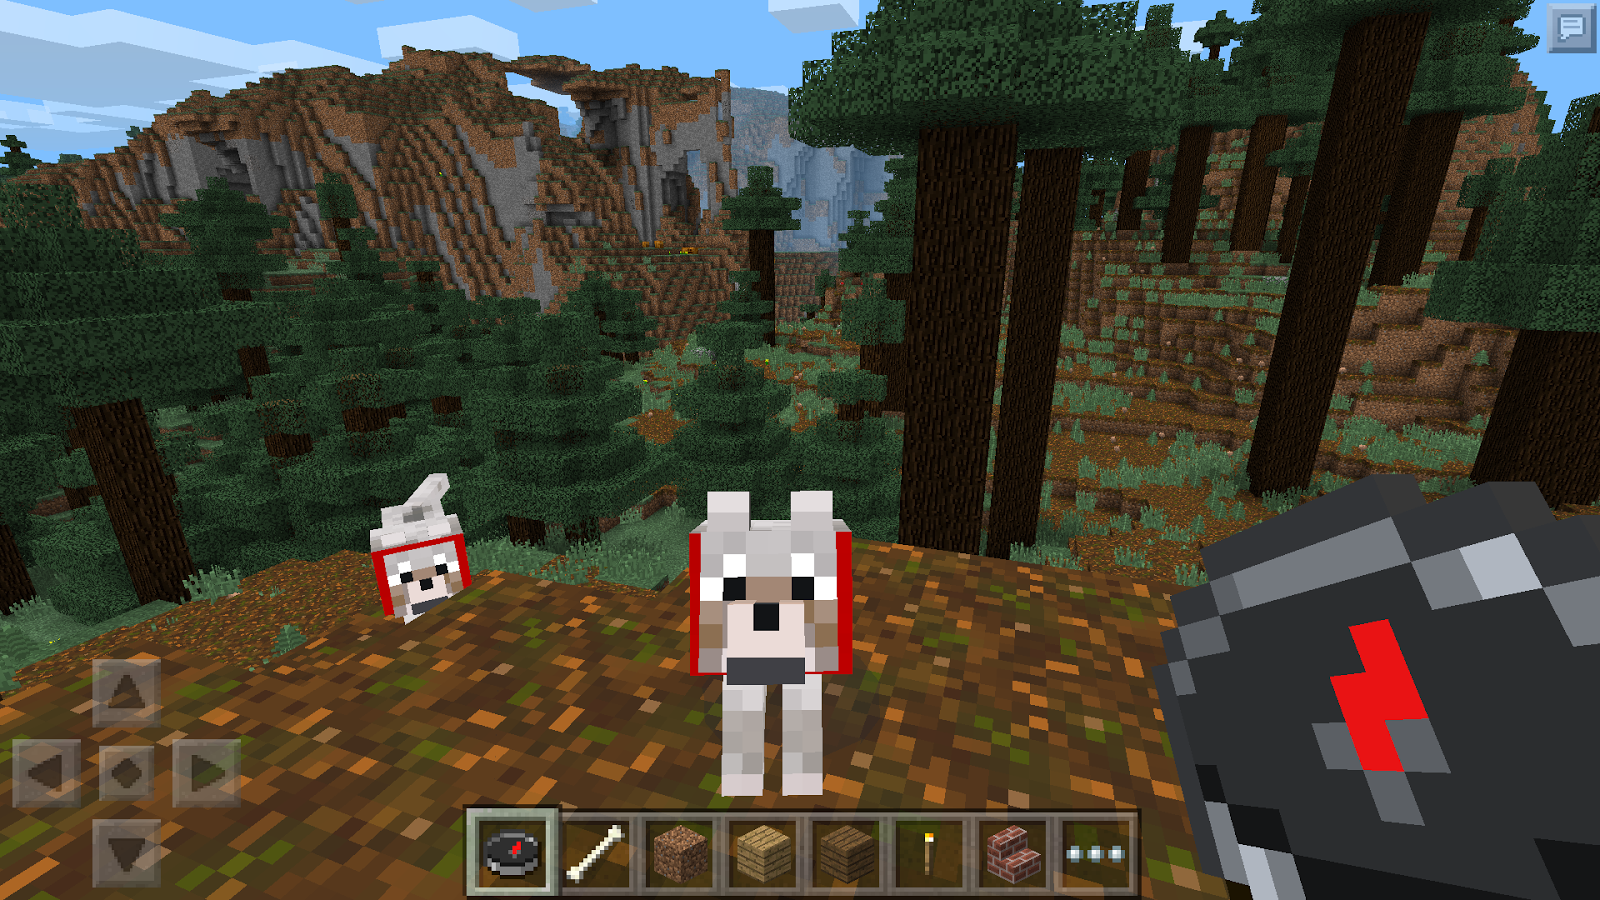 Minecraft Pocket Edition Free Download For Android 0.11.1